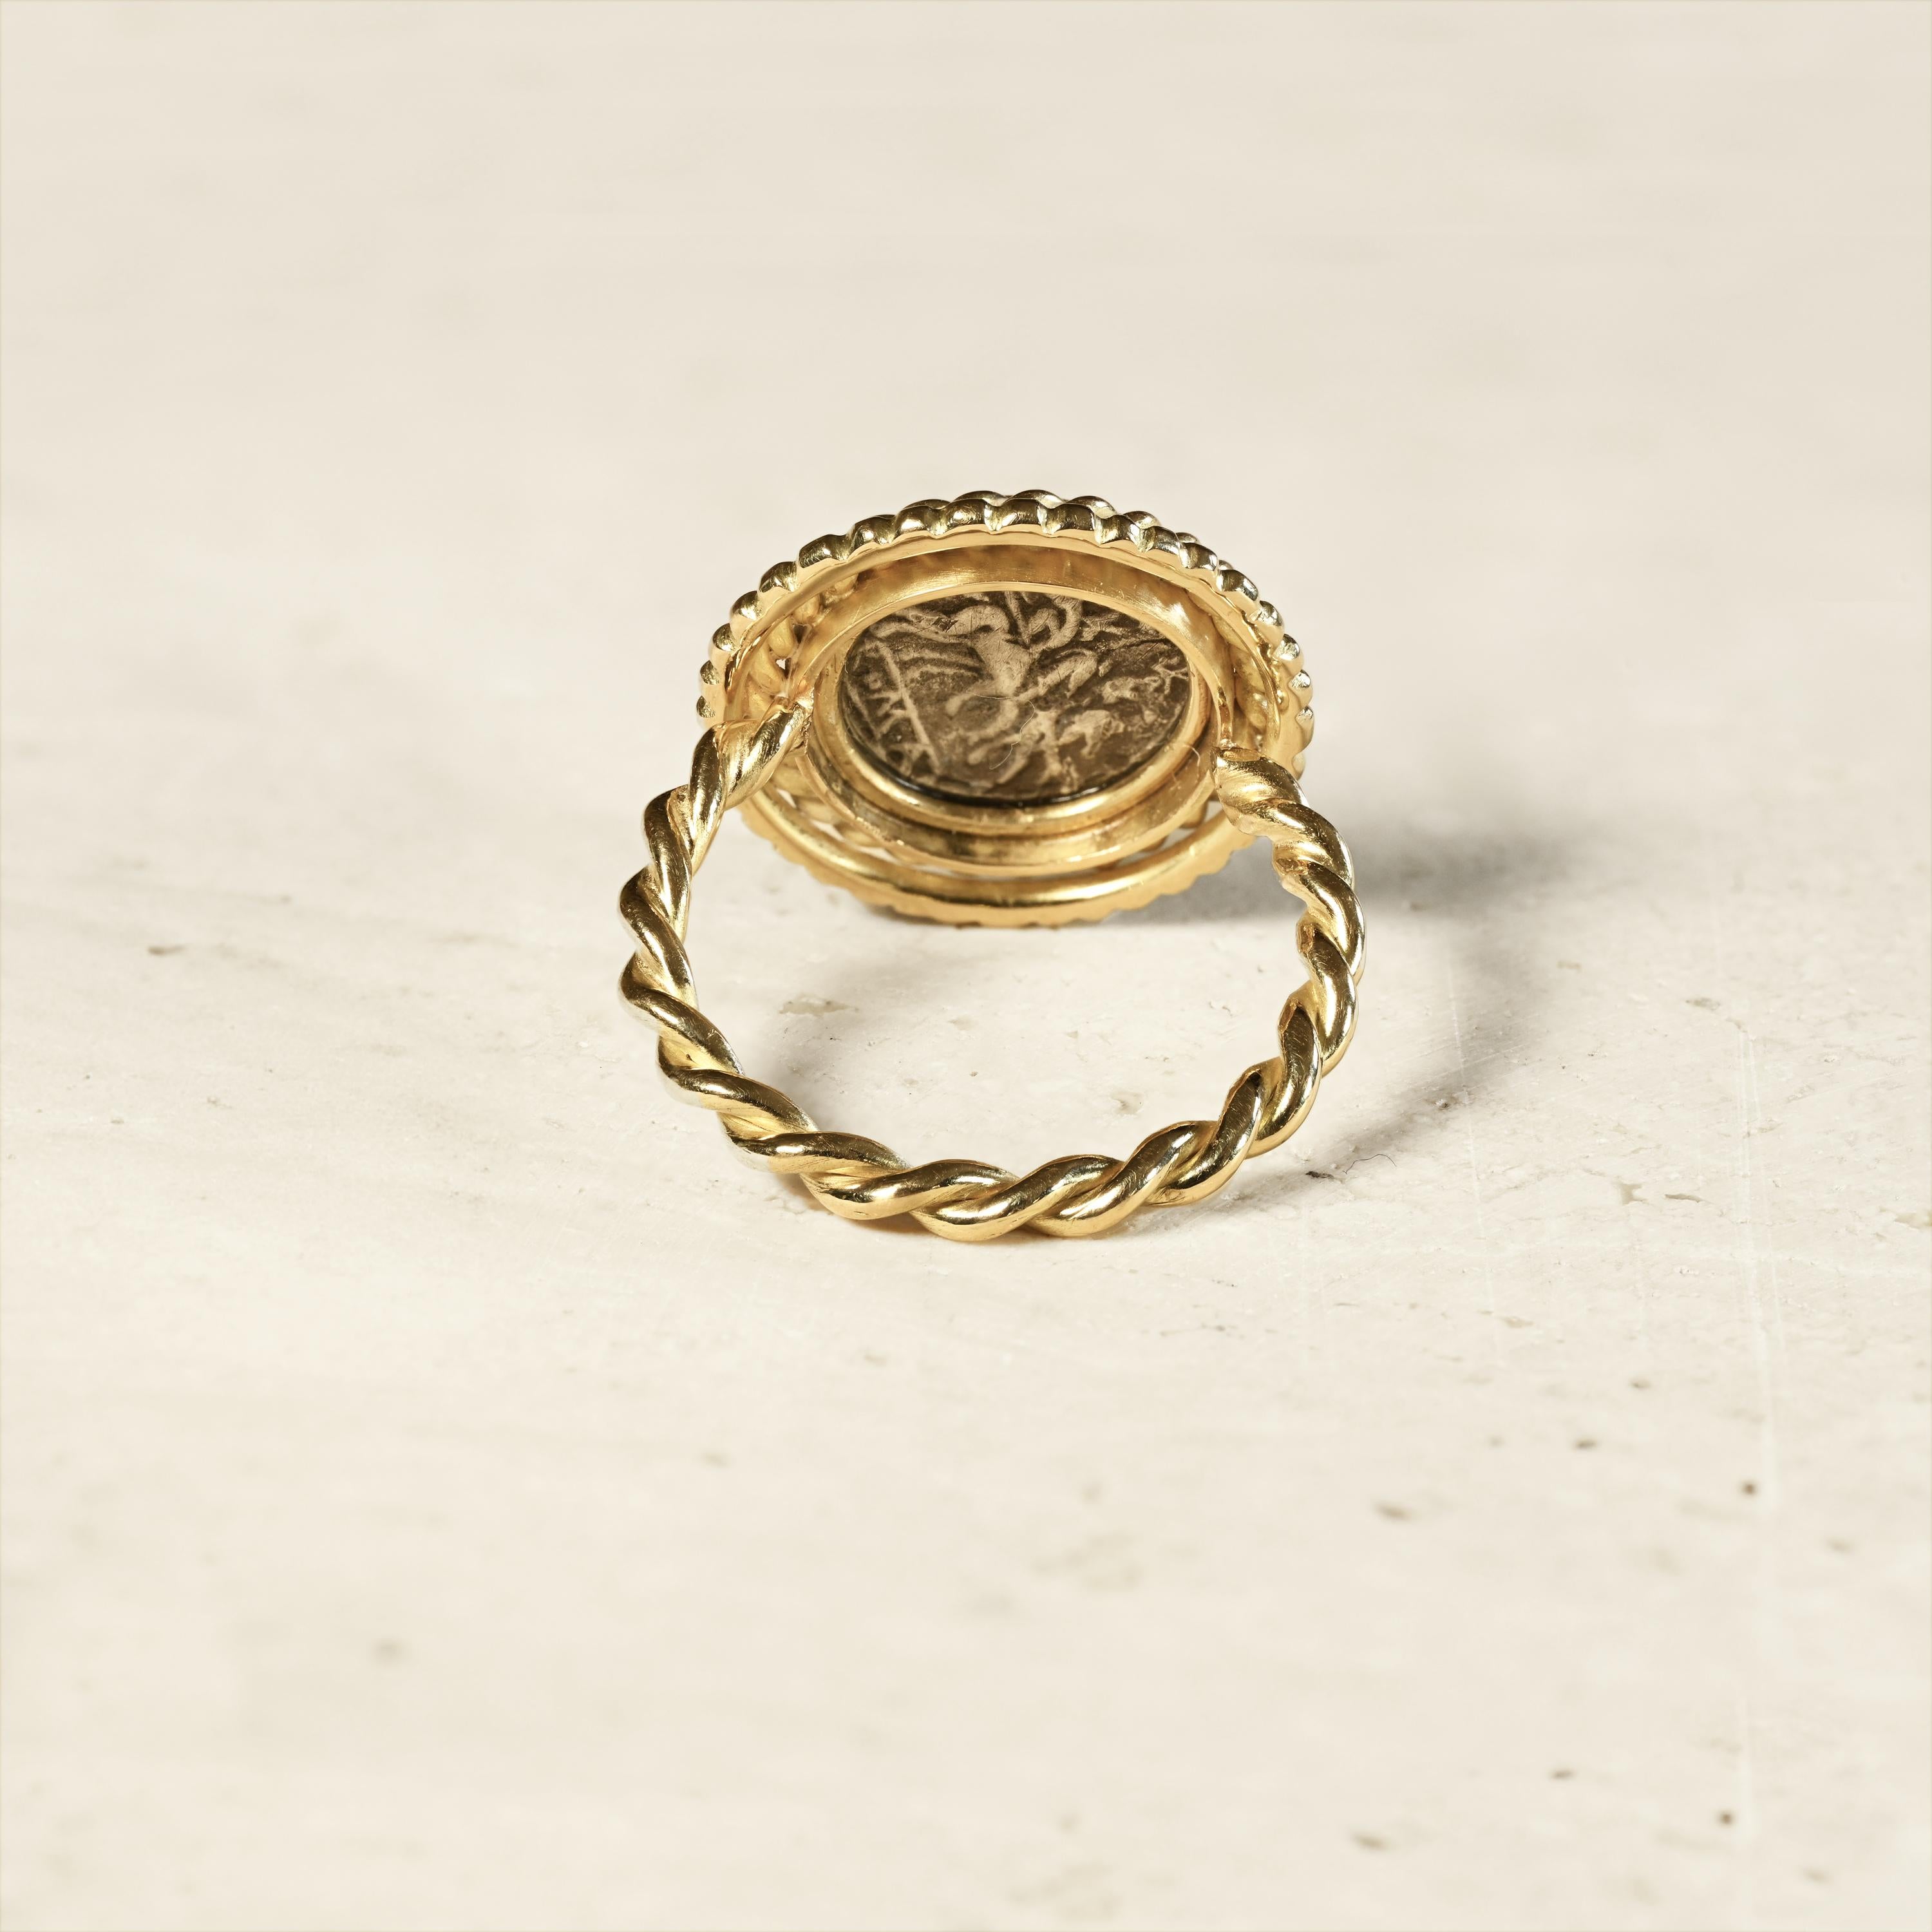 Genuine Roman Coin (3rd cent. BC) 18 Kt Gold Ring depicting the Goddess Rome  For Sale 5